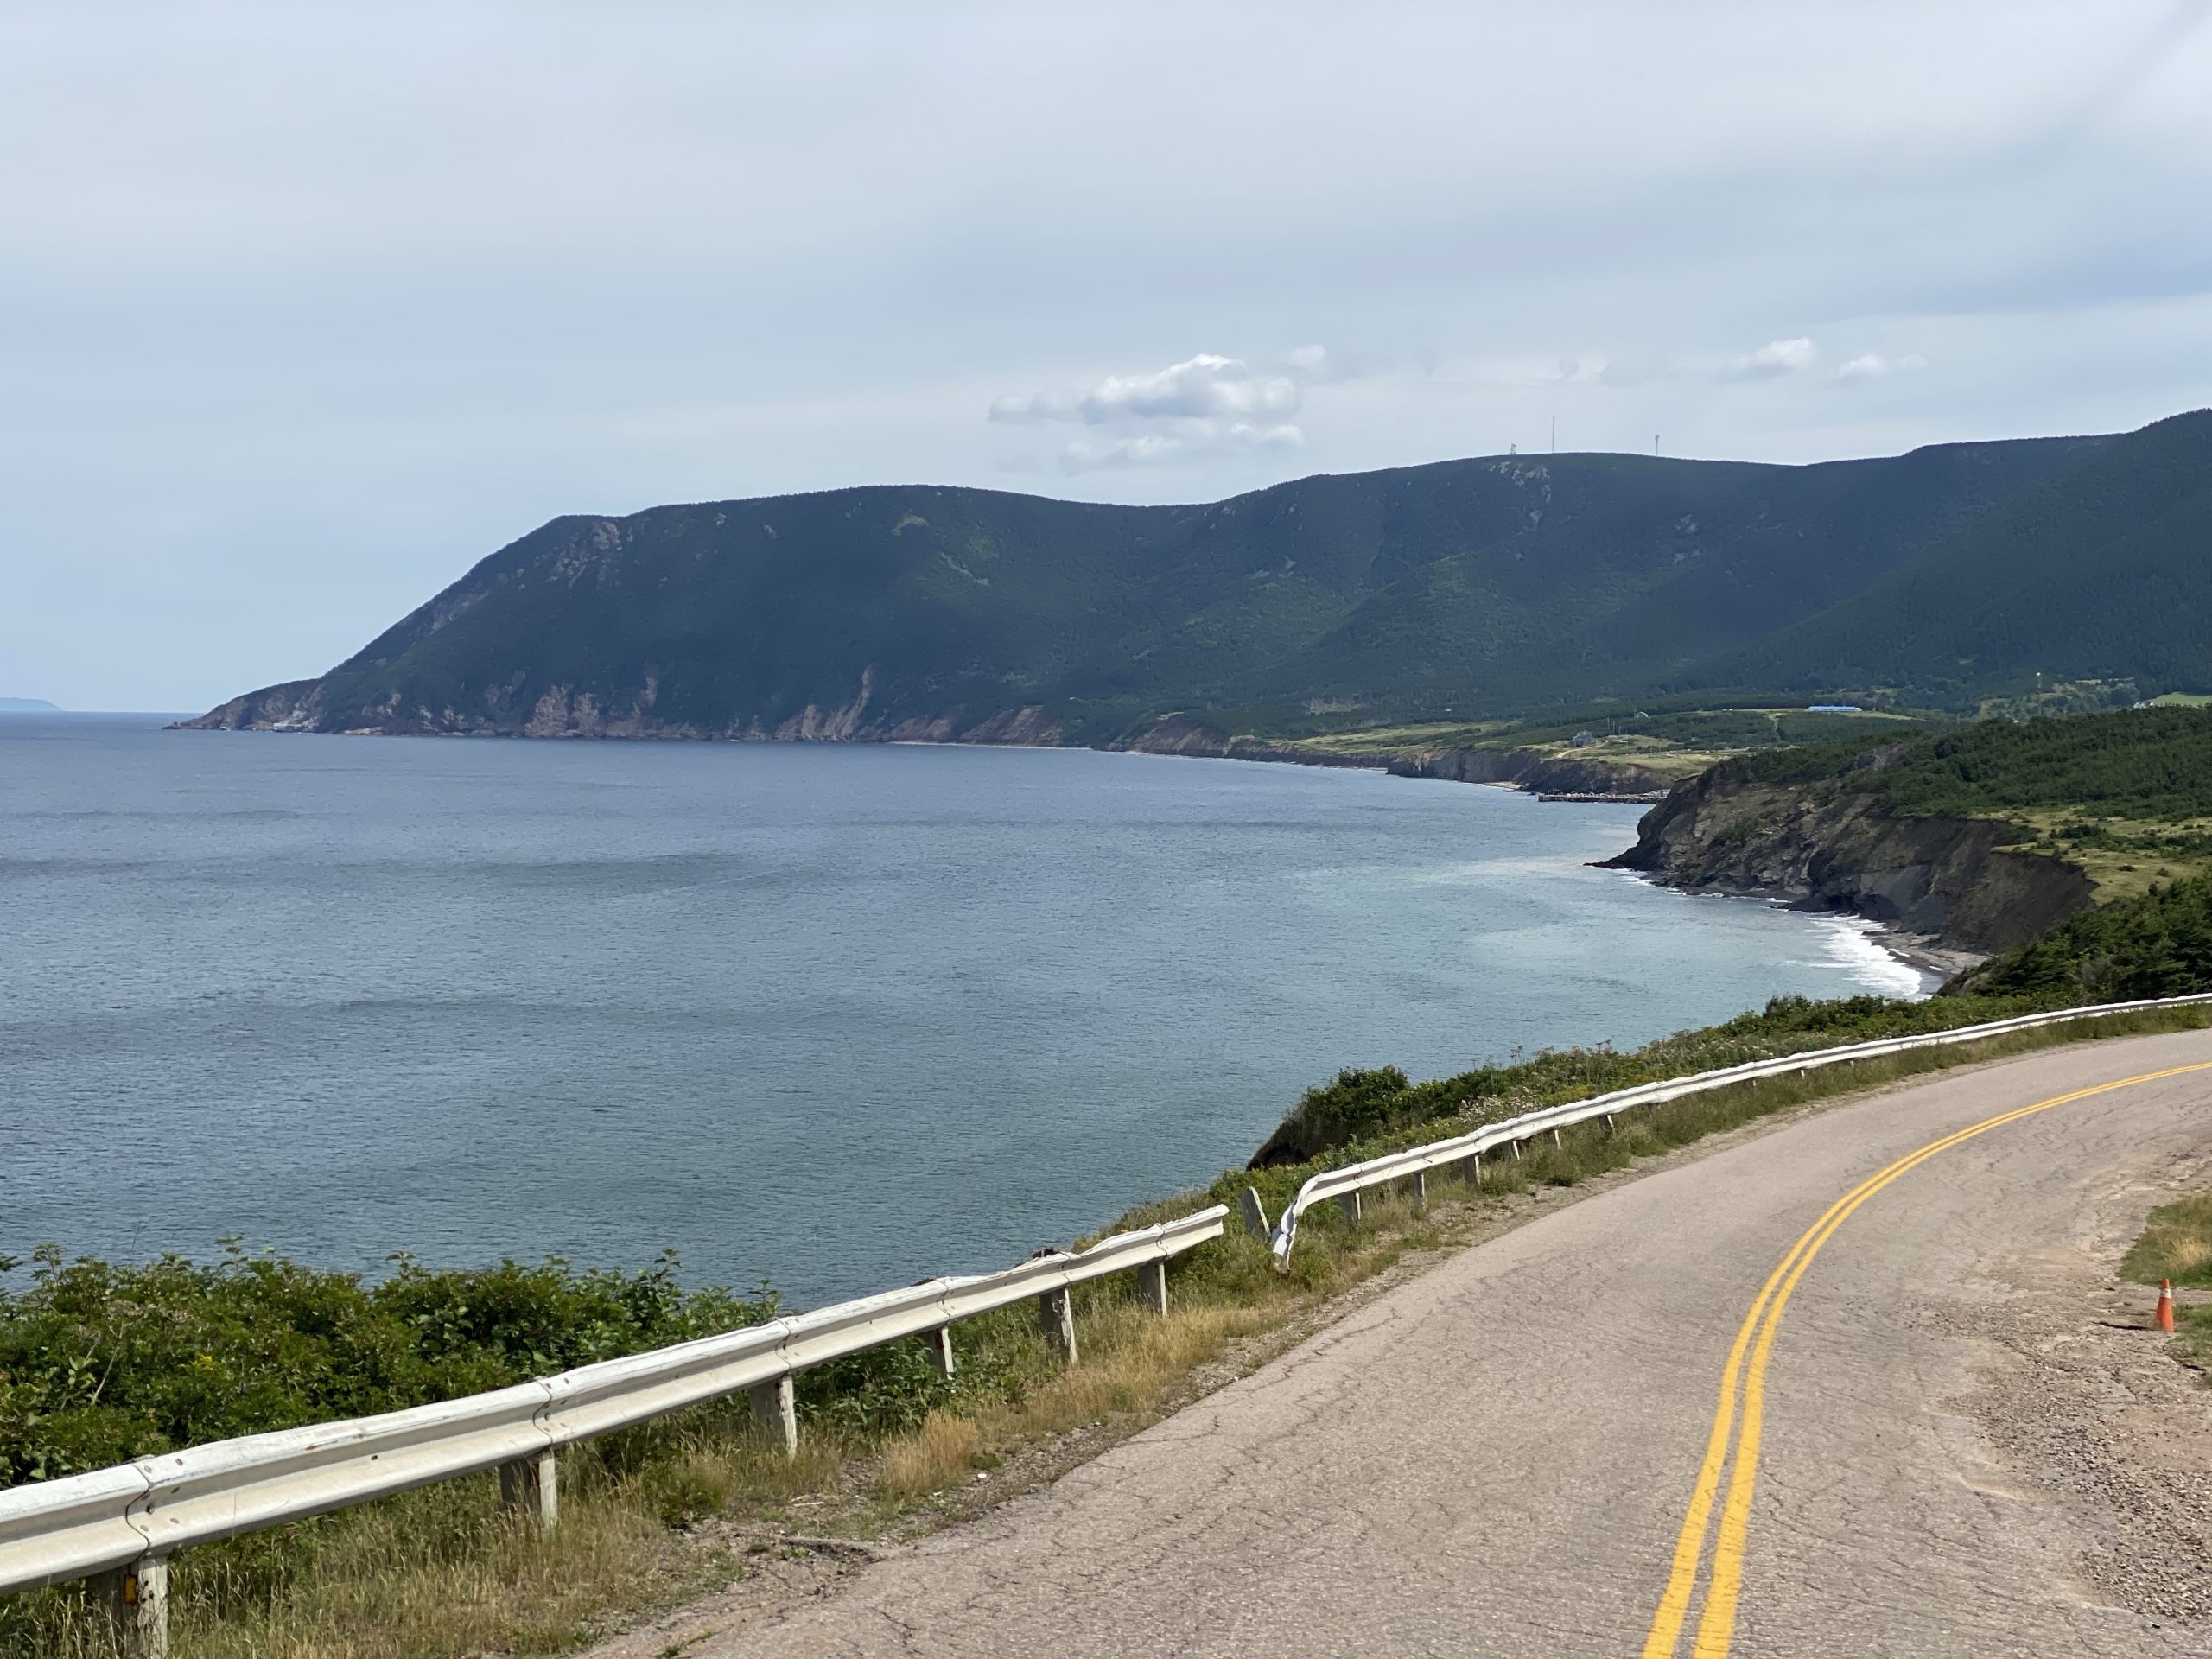 A view of the Bay St. Lawrence along the Cabot Trail in Nova Scotia.